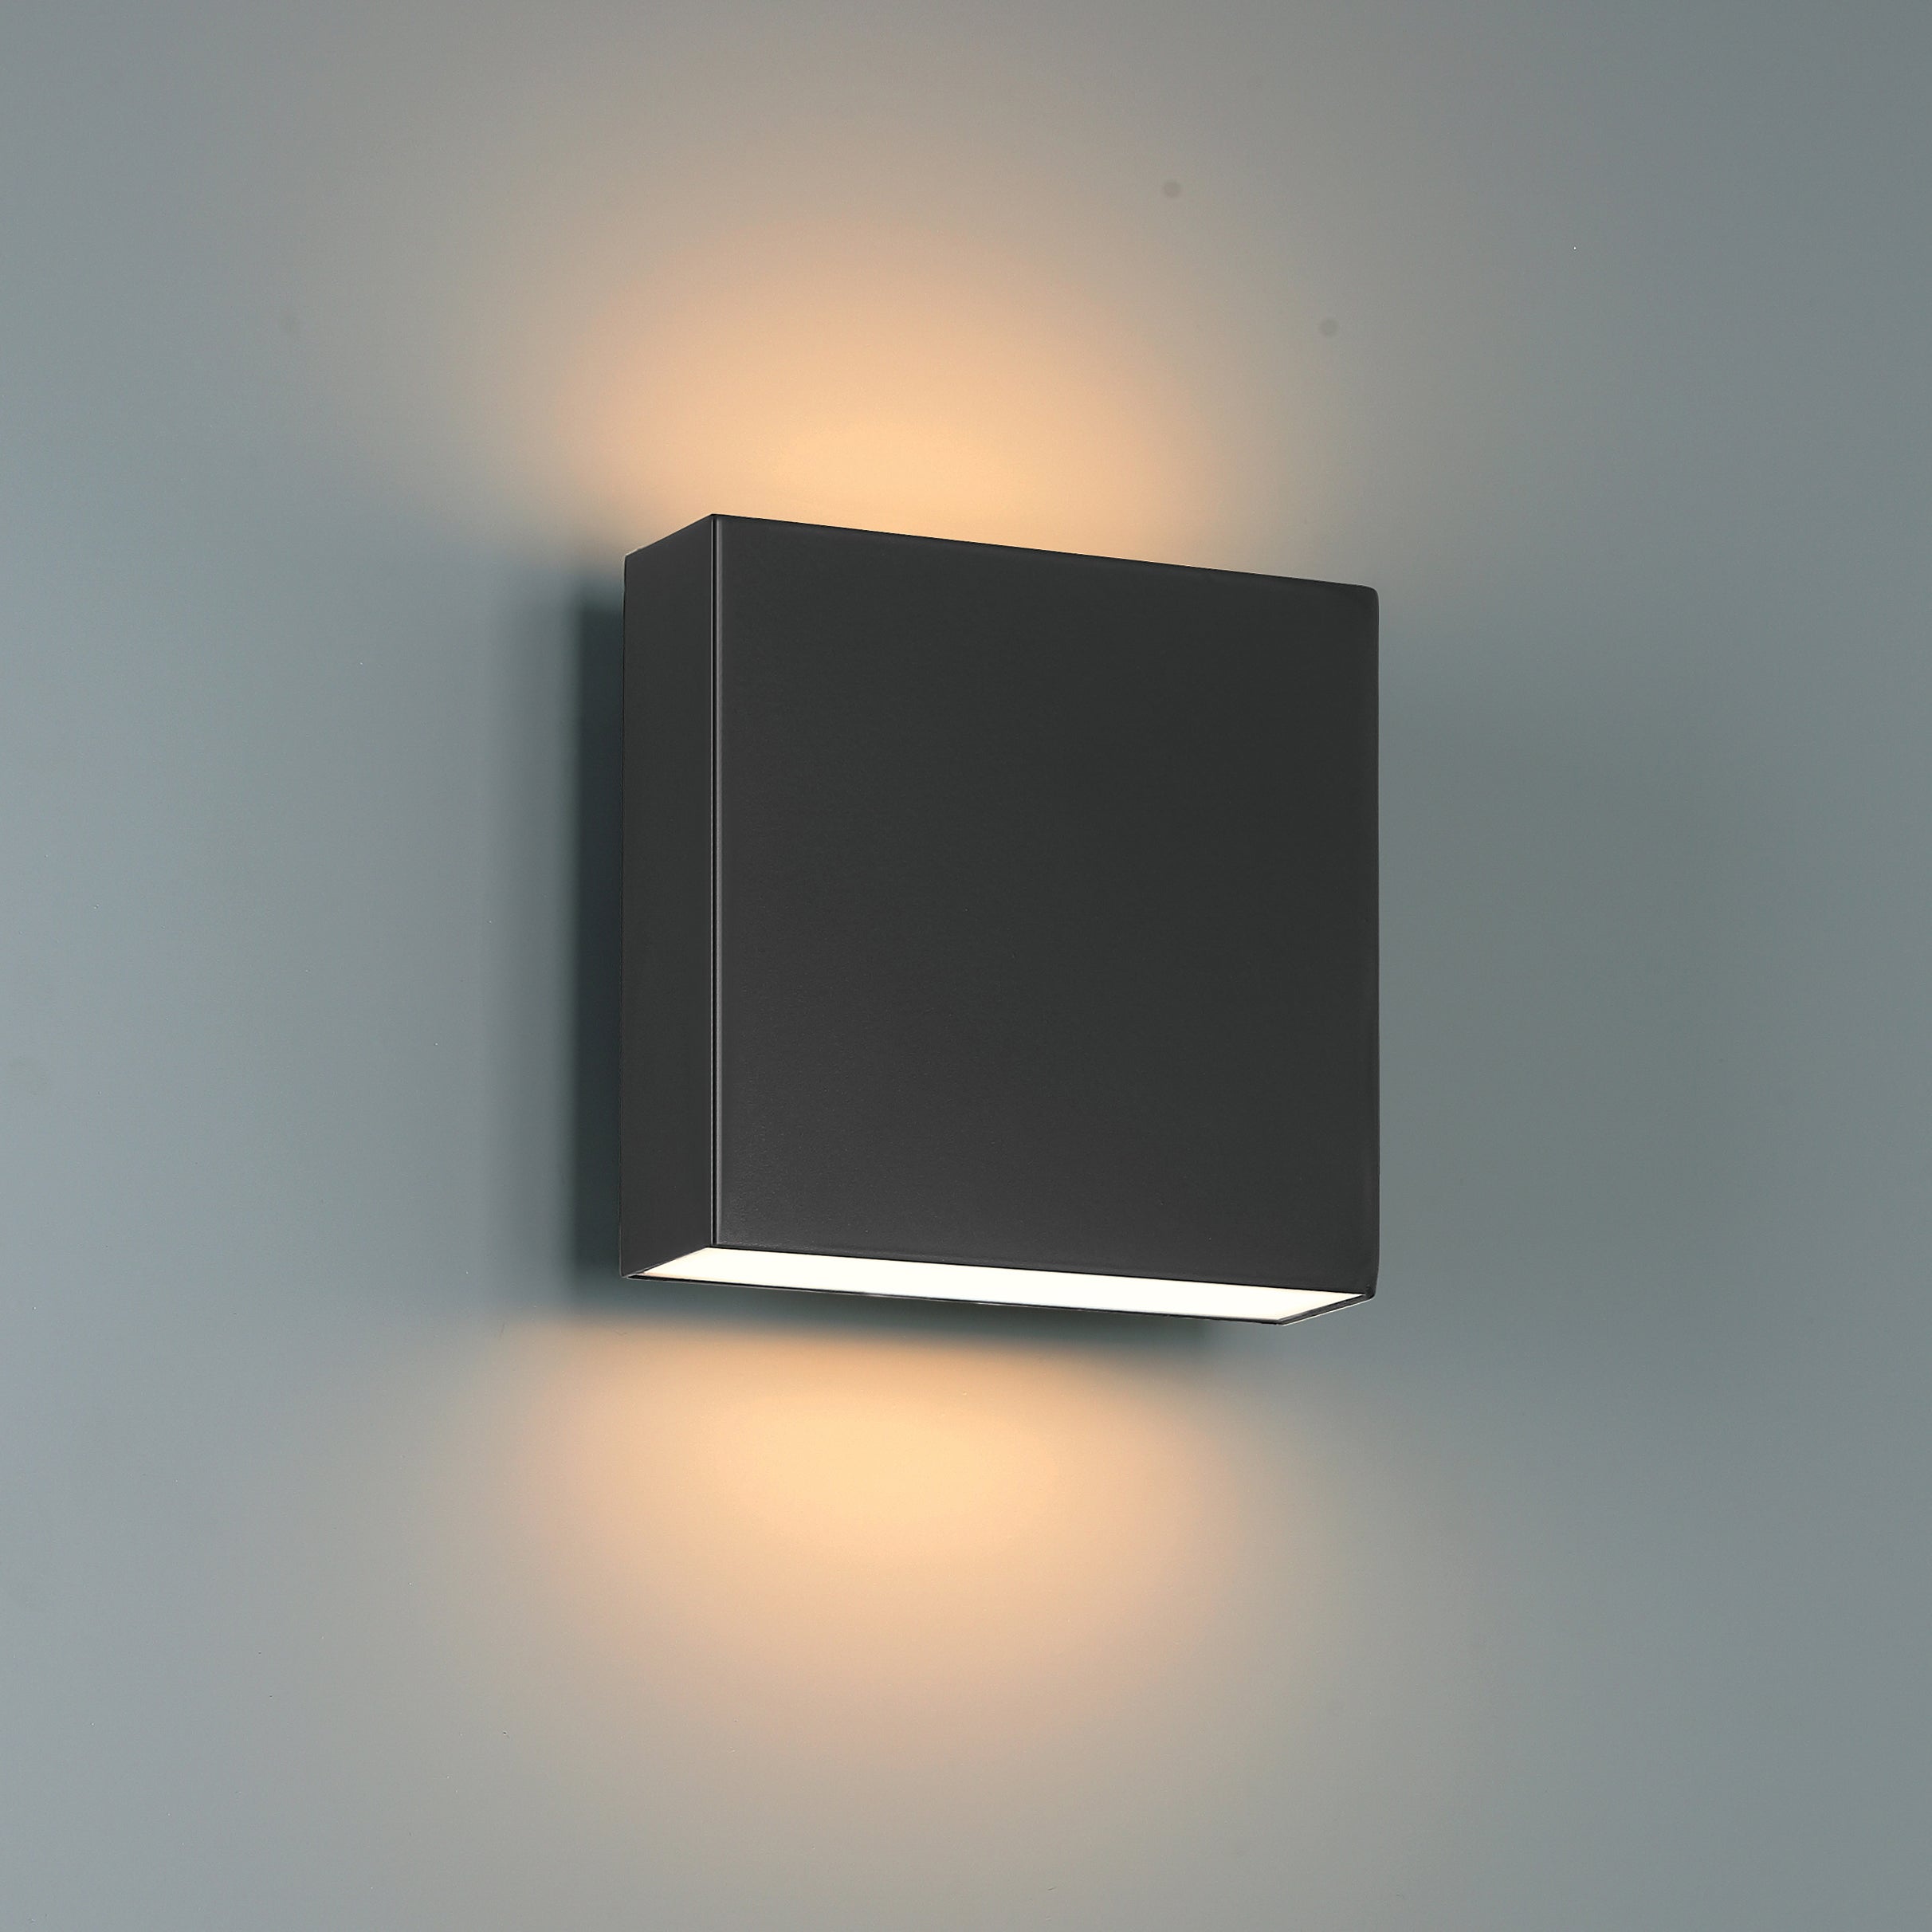 Strand Bi-Directional Outdoor LED Wall Mount Sconce Light